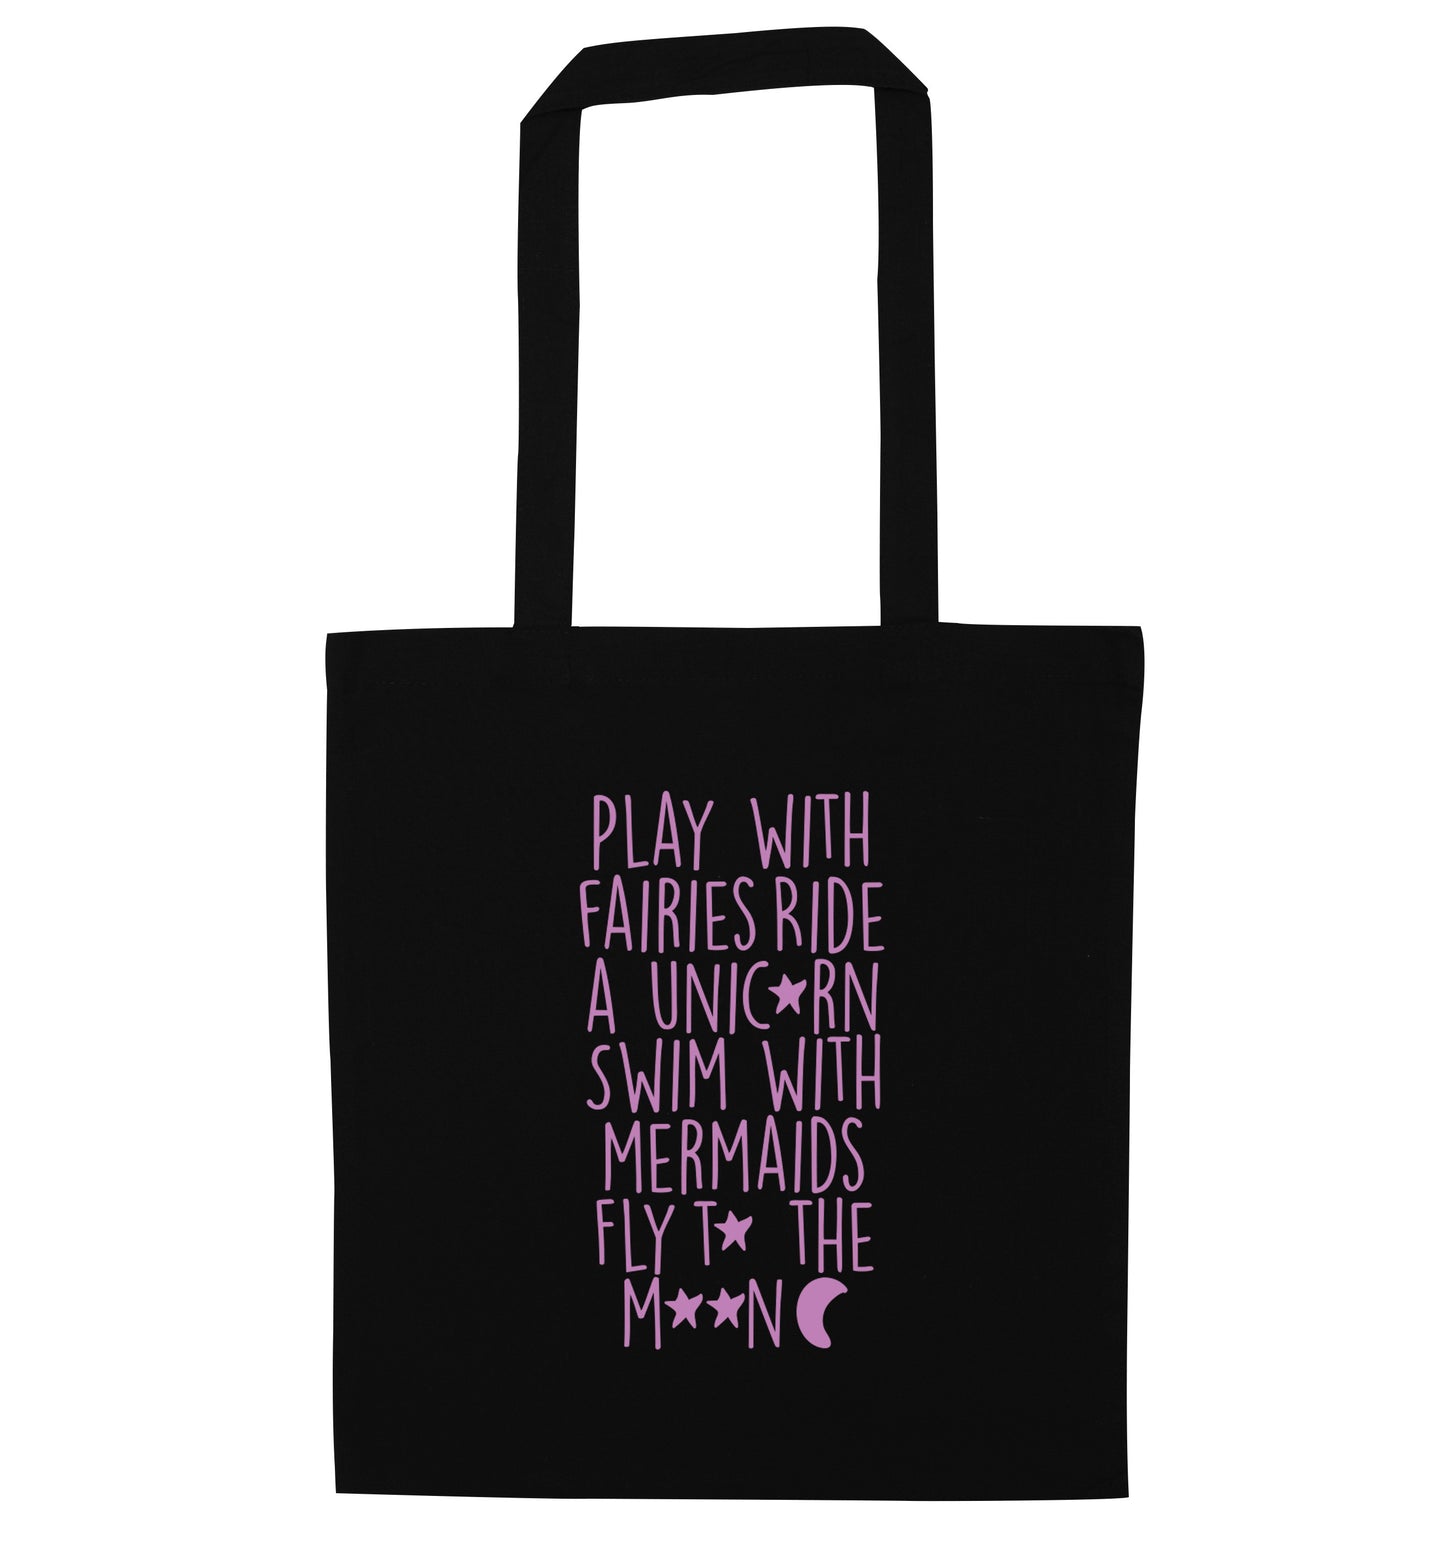 Play with fairies ride a unicorn swim with mermaids fly to the moon black tote bag